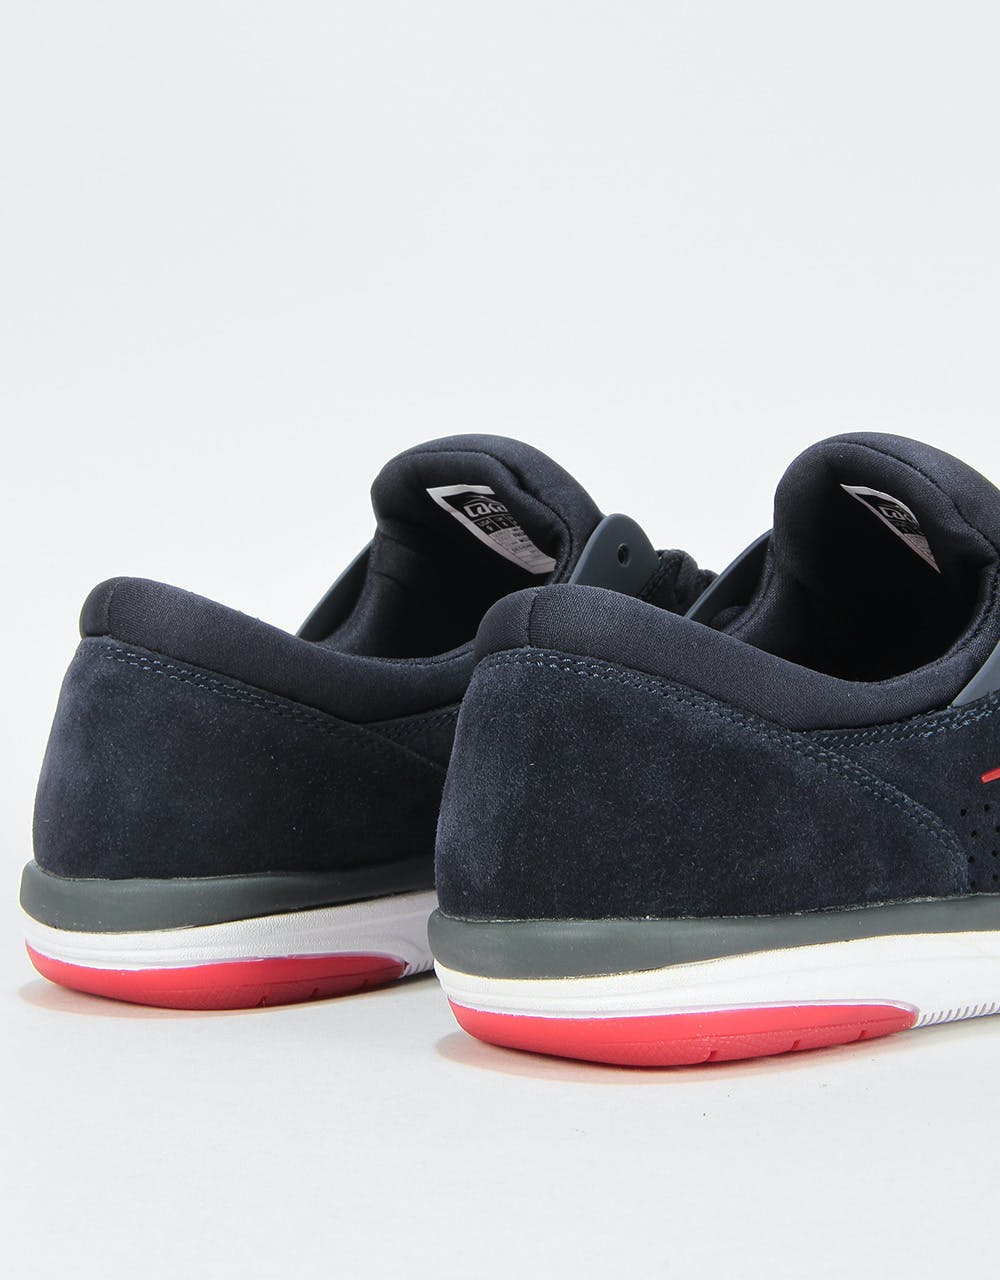 Lakai Fremont Skate Shoes - Navy/Red Suede